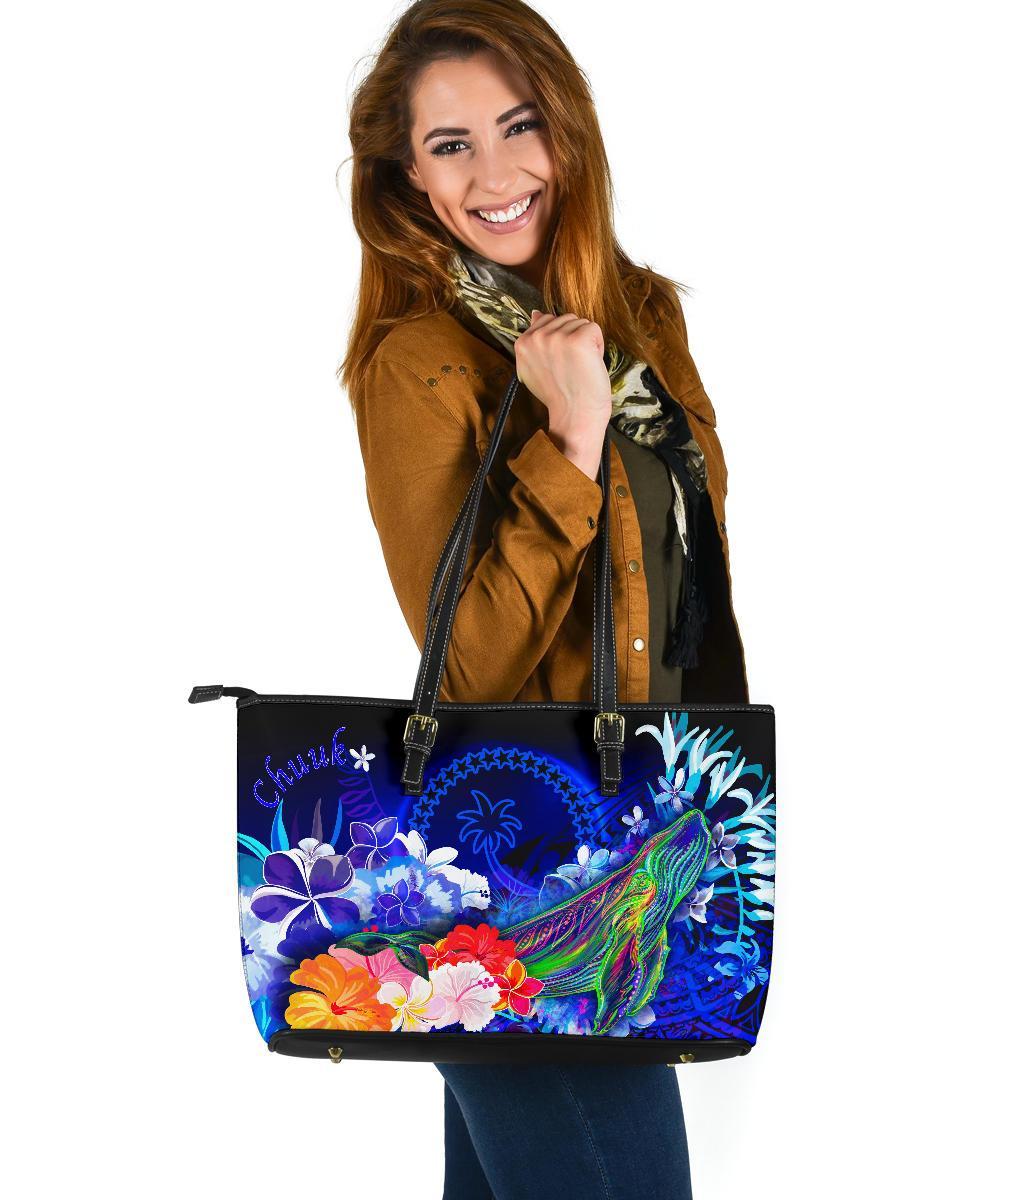 Chuuk Large Leather Tote Bag - Humpback Whale with Tropical Flowers (Blue) Blue - Polynesian Pride